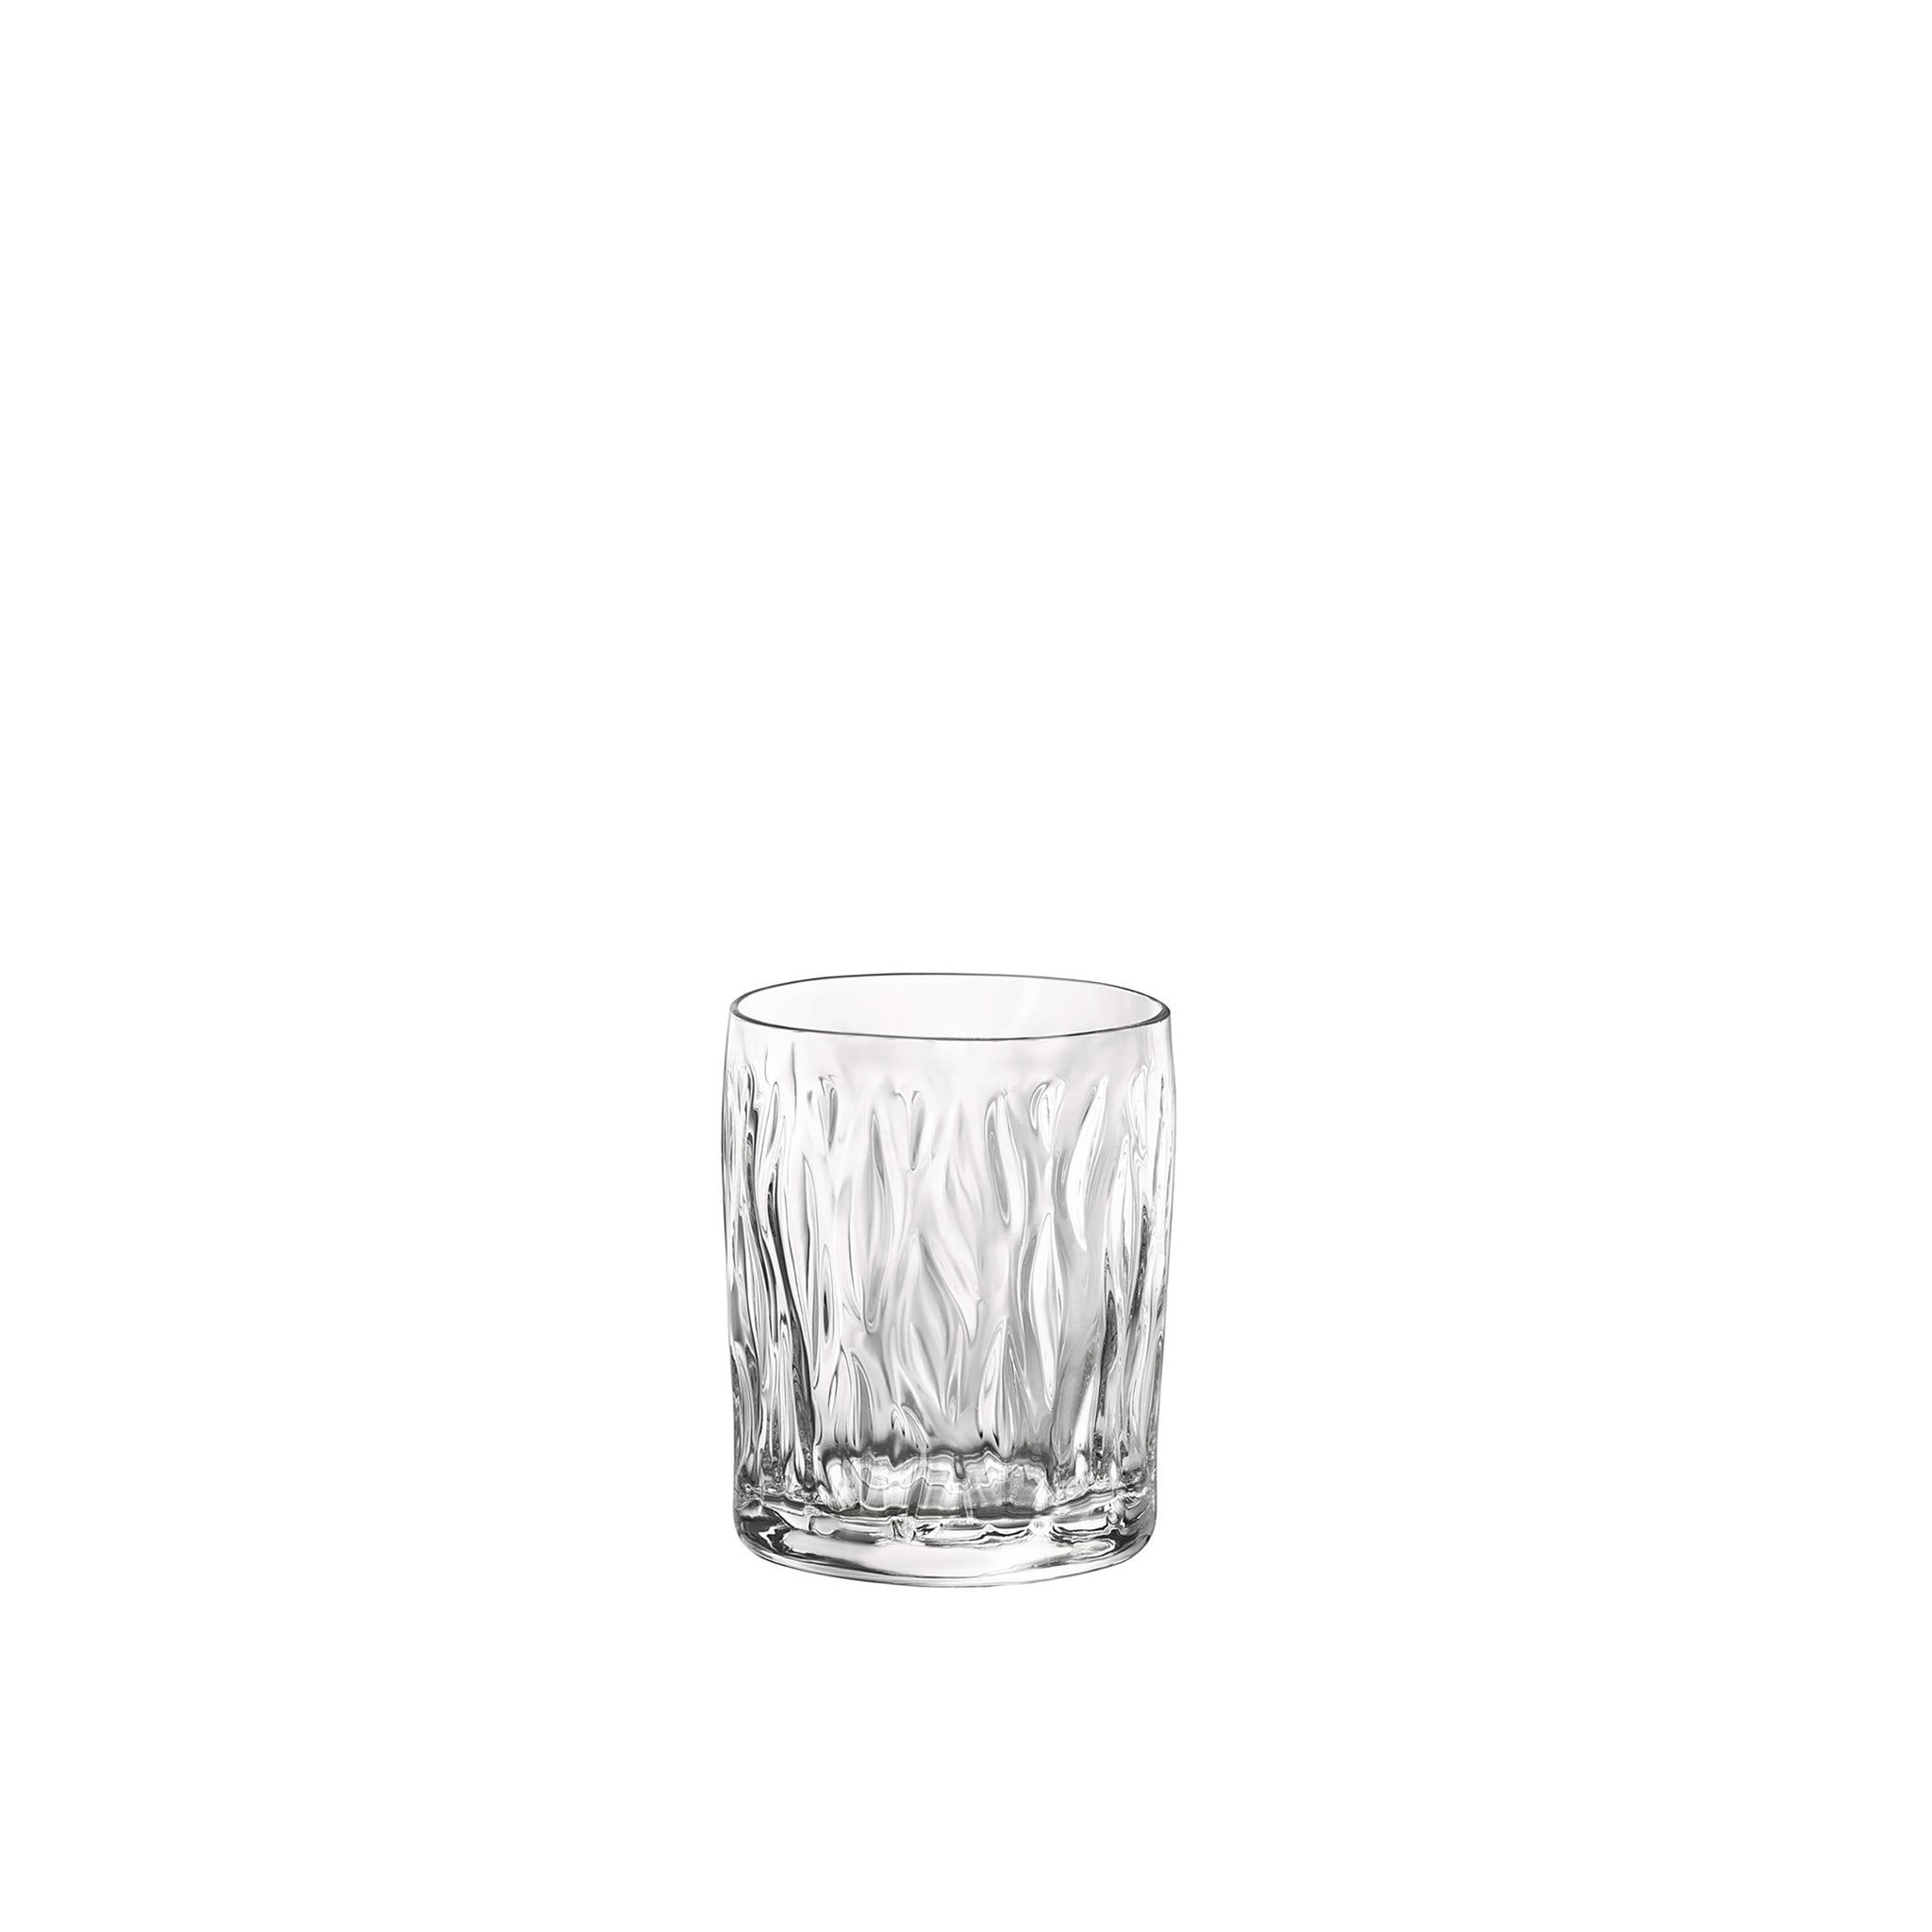 Bormioli Rocco Wind 10.25 oz. Water Drinking Glasses, Clear (Set of 6)